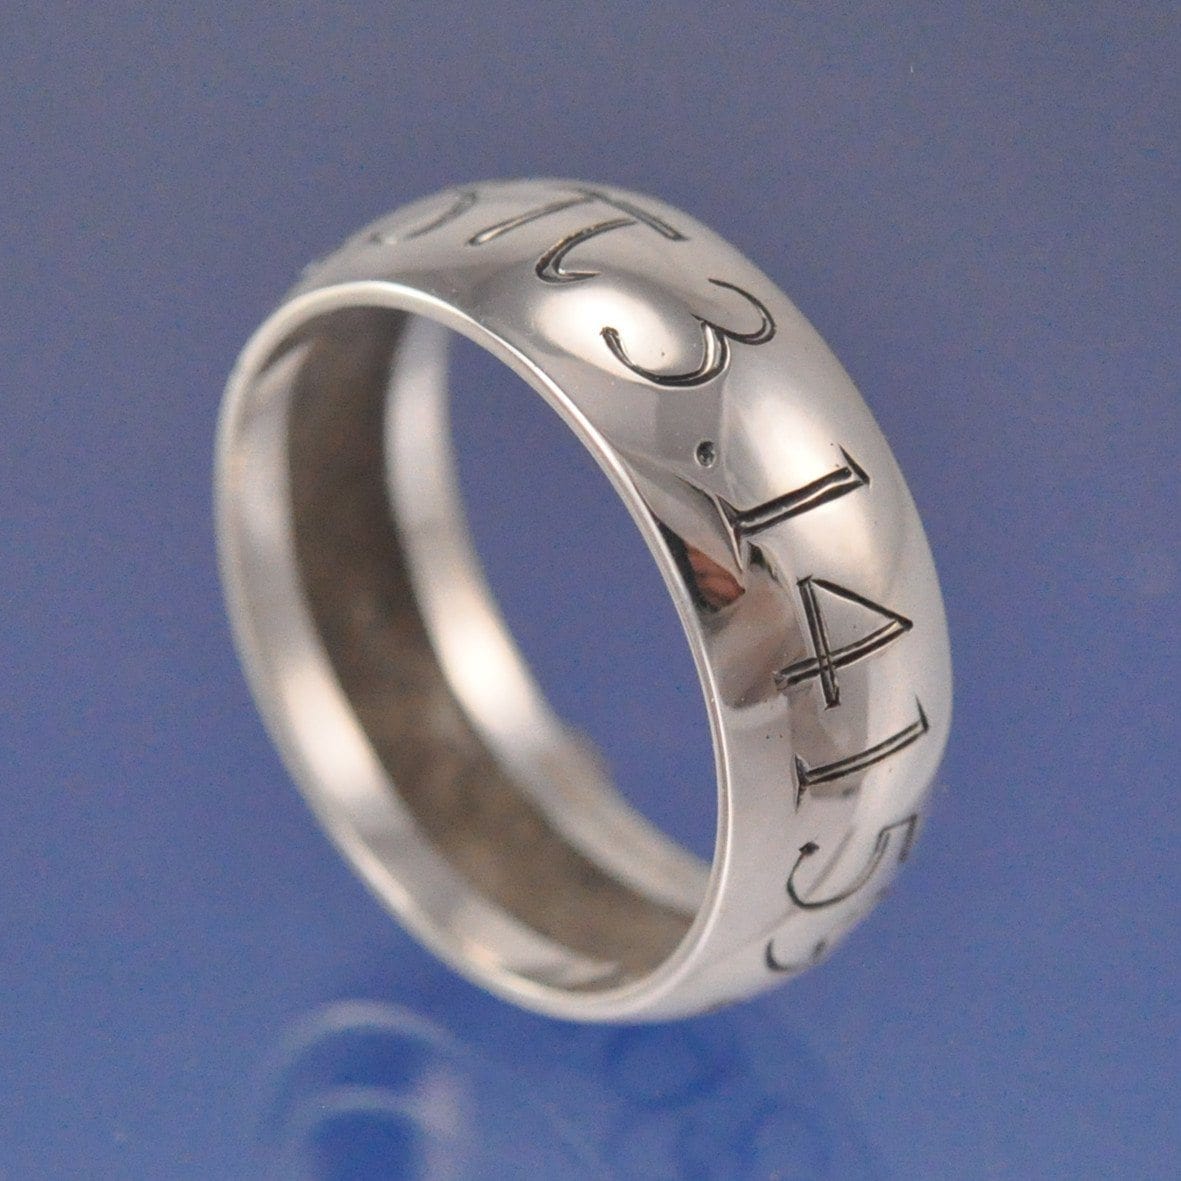 Cremation Ash Ring. Hidden 7mm Ring by Chris Parry Jewellery